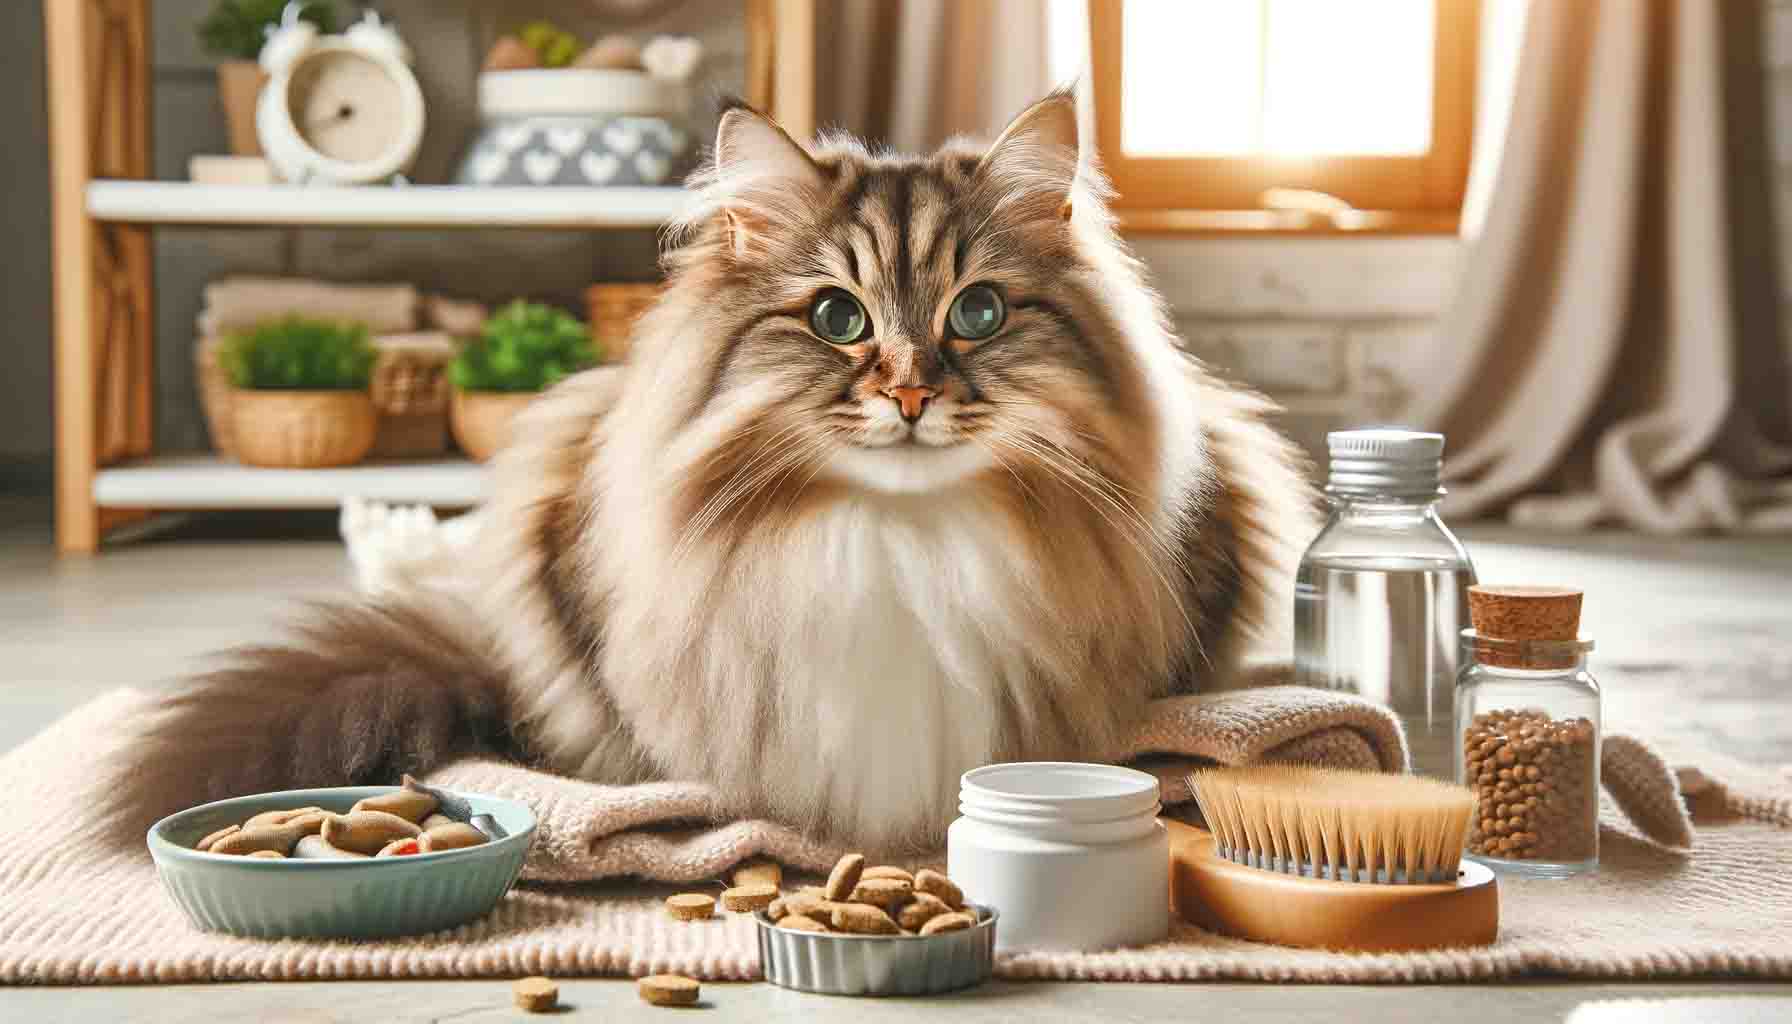 How to Make Your Cat's Hair Shiny Naturally